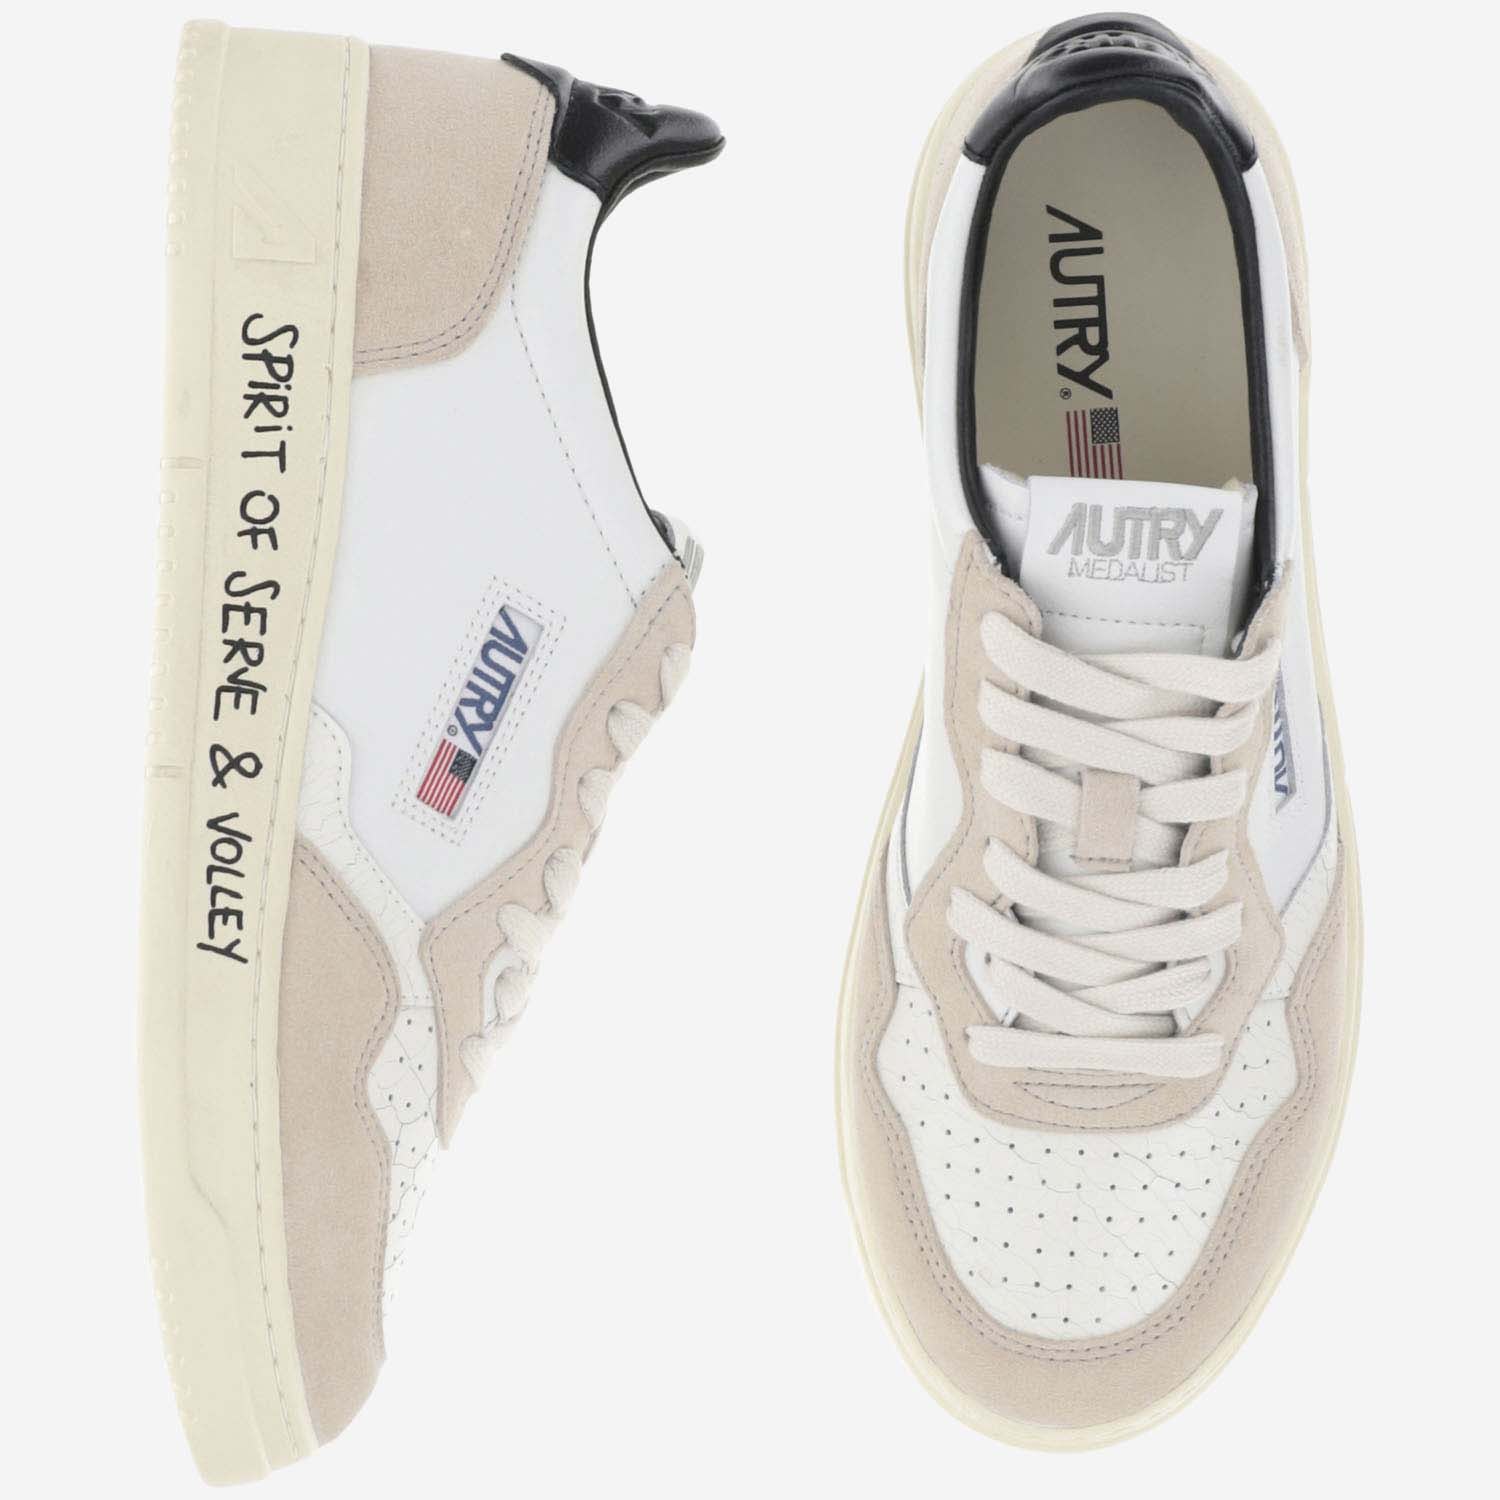 Shop Autry Low Medalist Spirit Of Serve & Volley Sneakers In Bianco